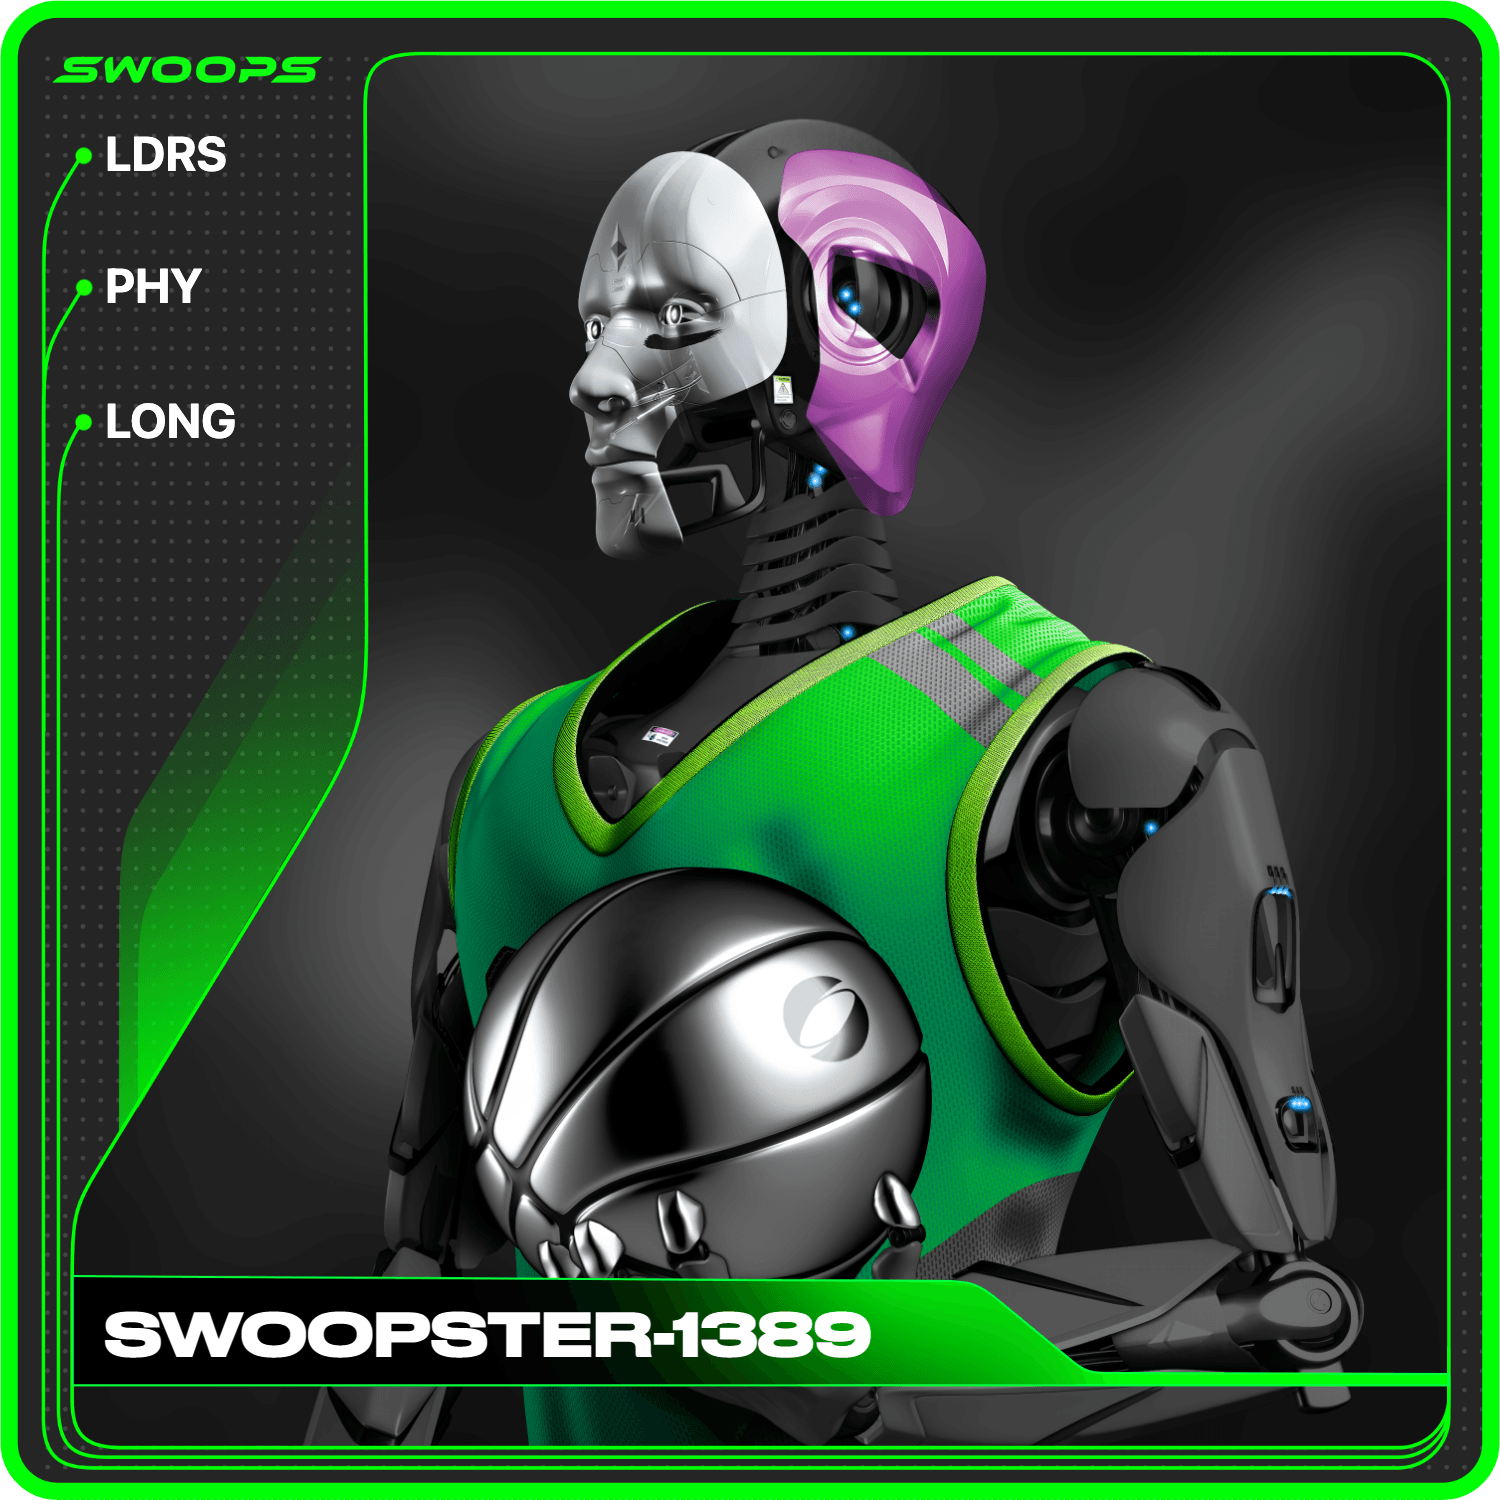 SWOOPSTER-1389